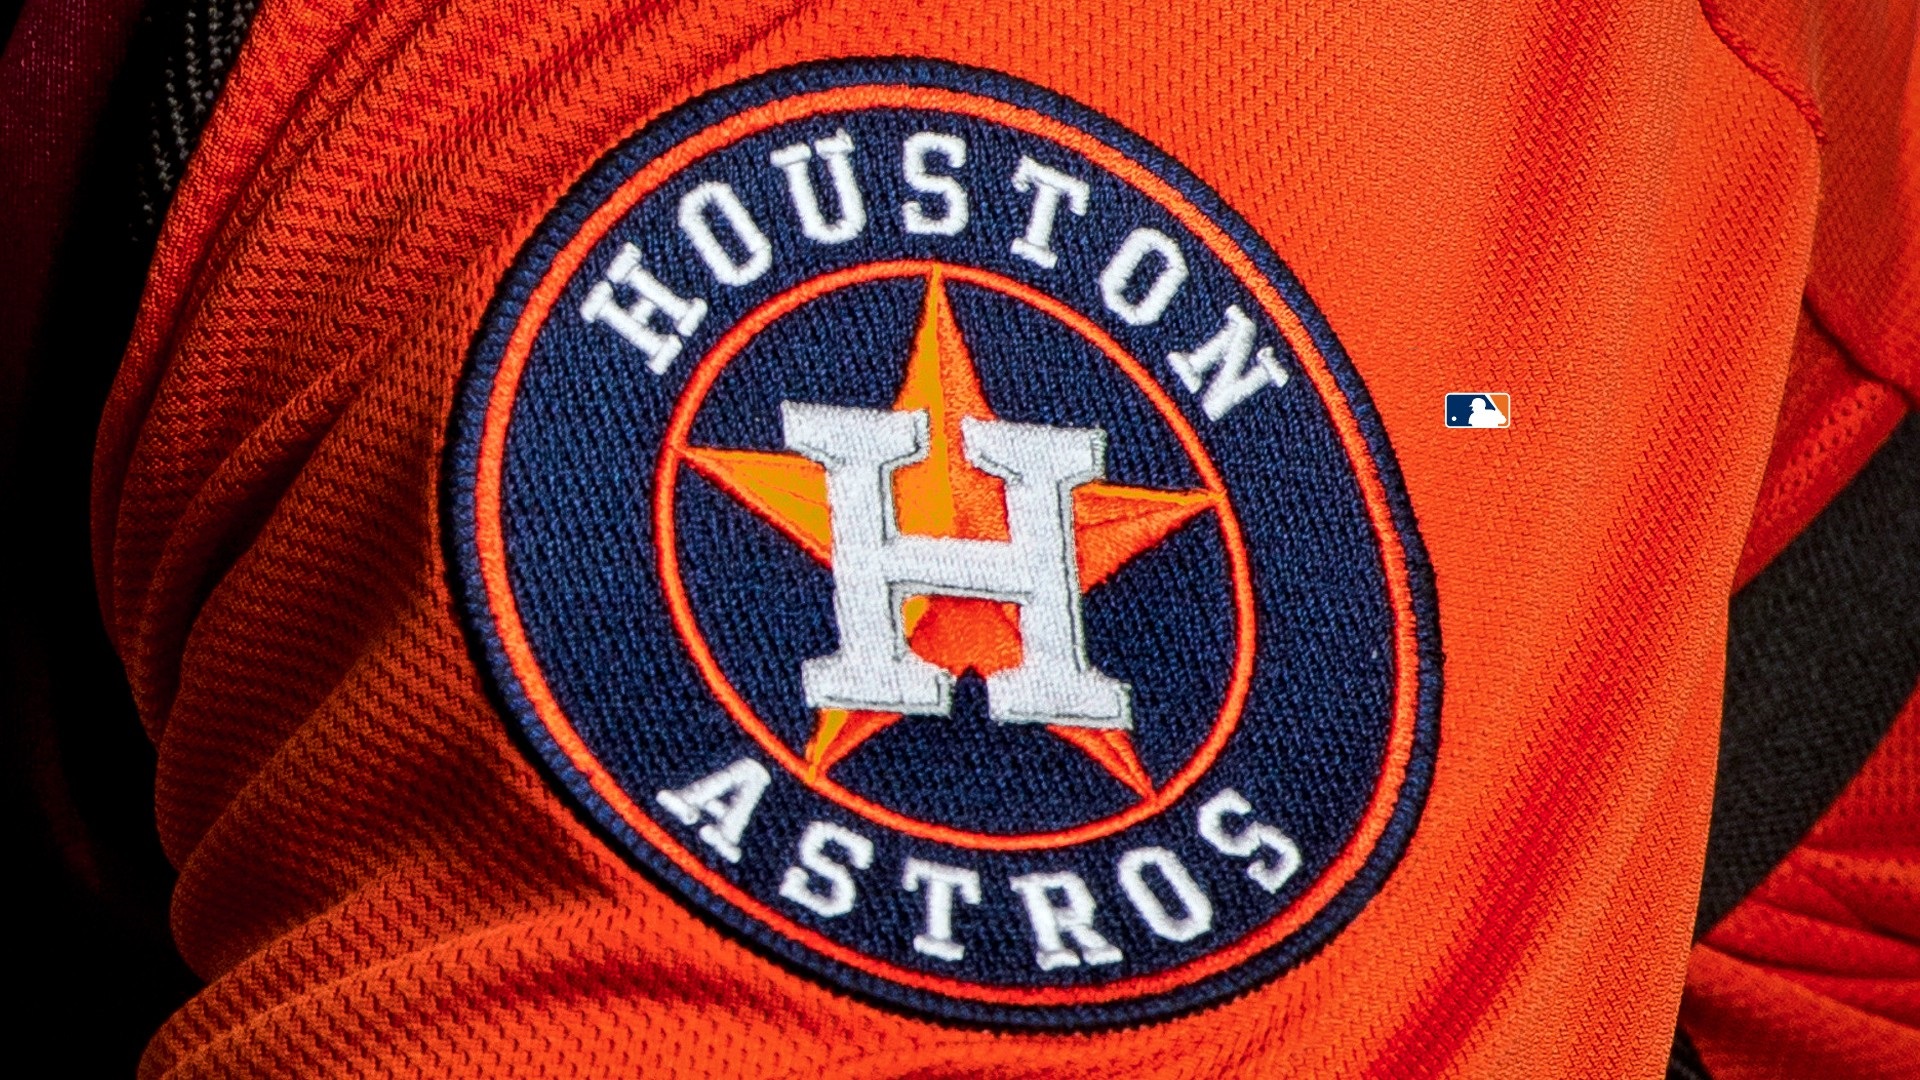 Houston Astros MLB HD Wallpapers With high-resolution 1920X1080 pixel. You can use this wallpaper for Mac Desktop Wallpaper, Laptop Screensavers, Android Wallpapers, Tablet or iPhone Home Screen and another mobile phone device